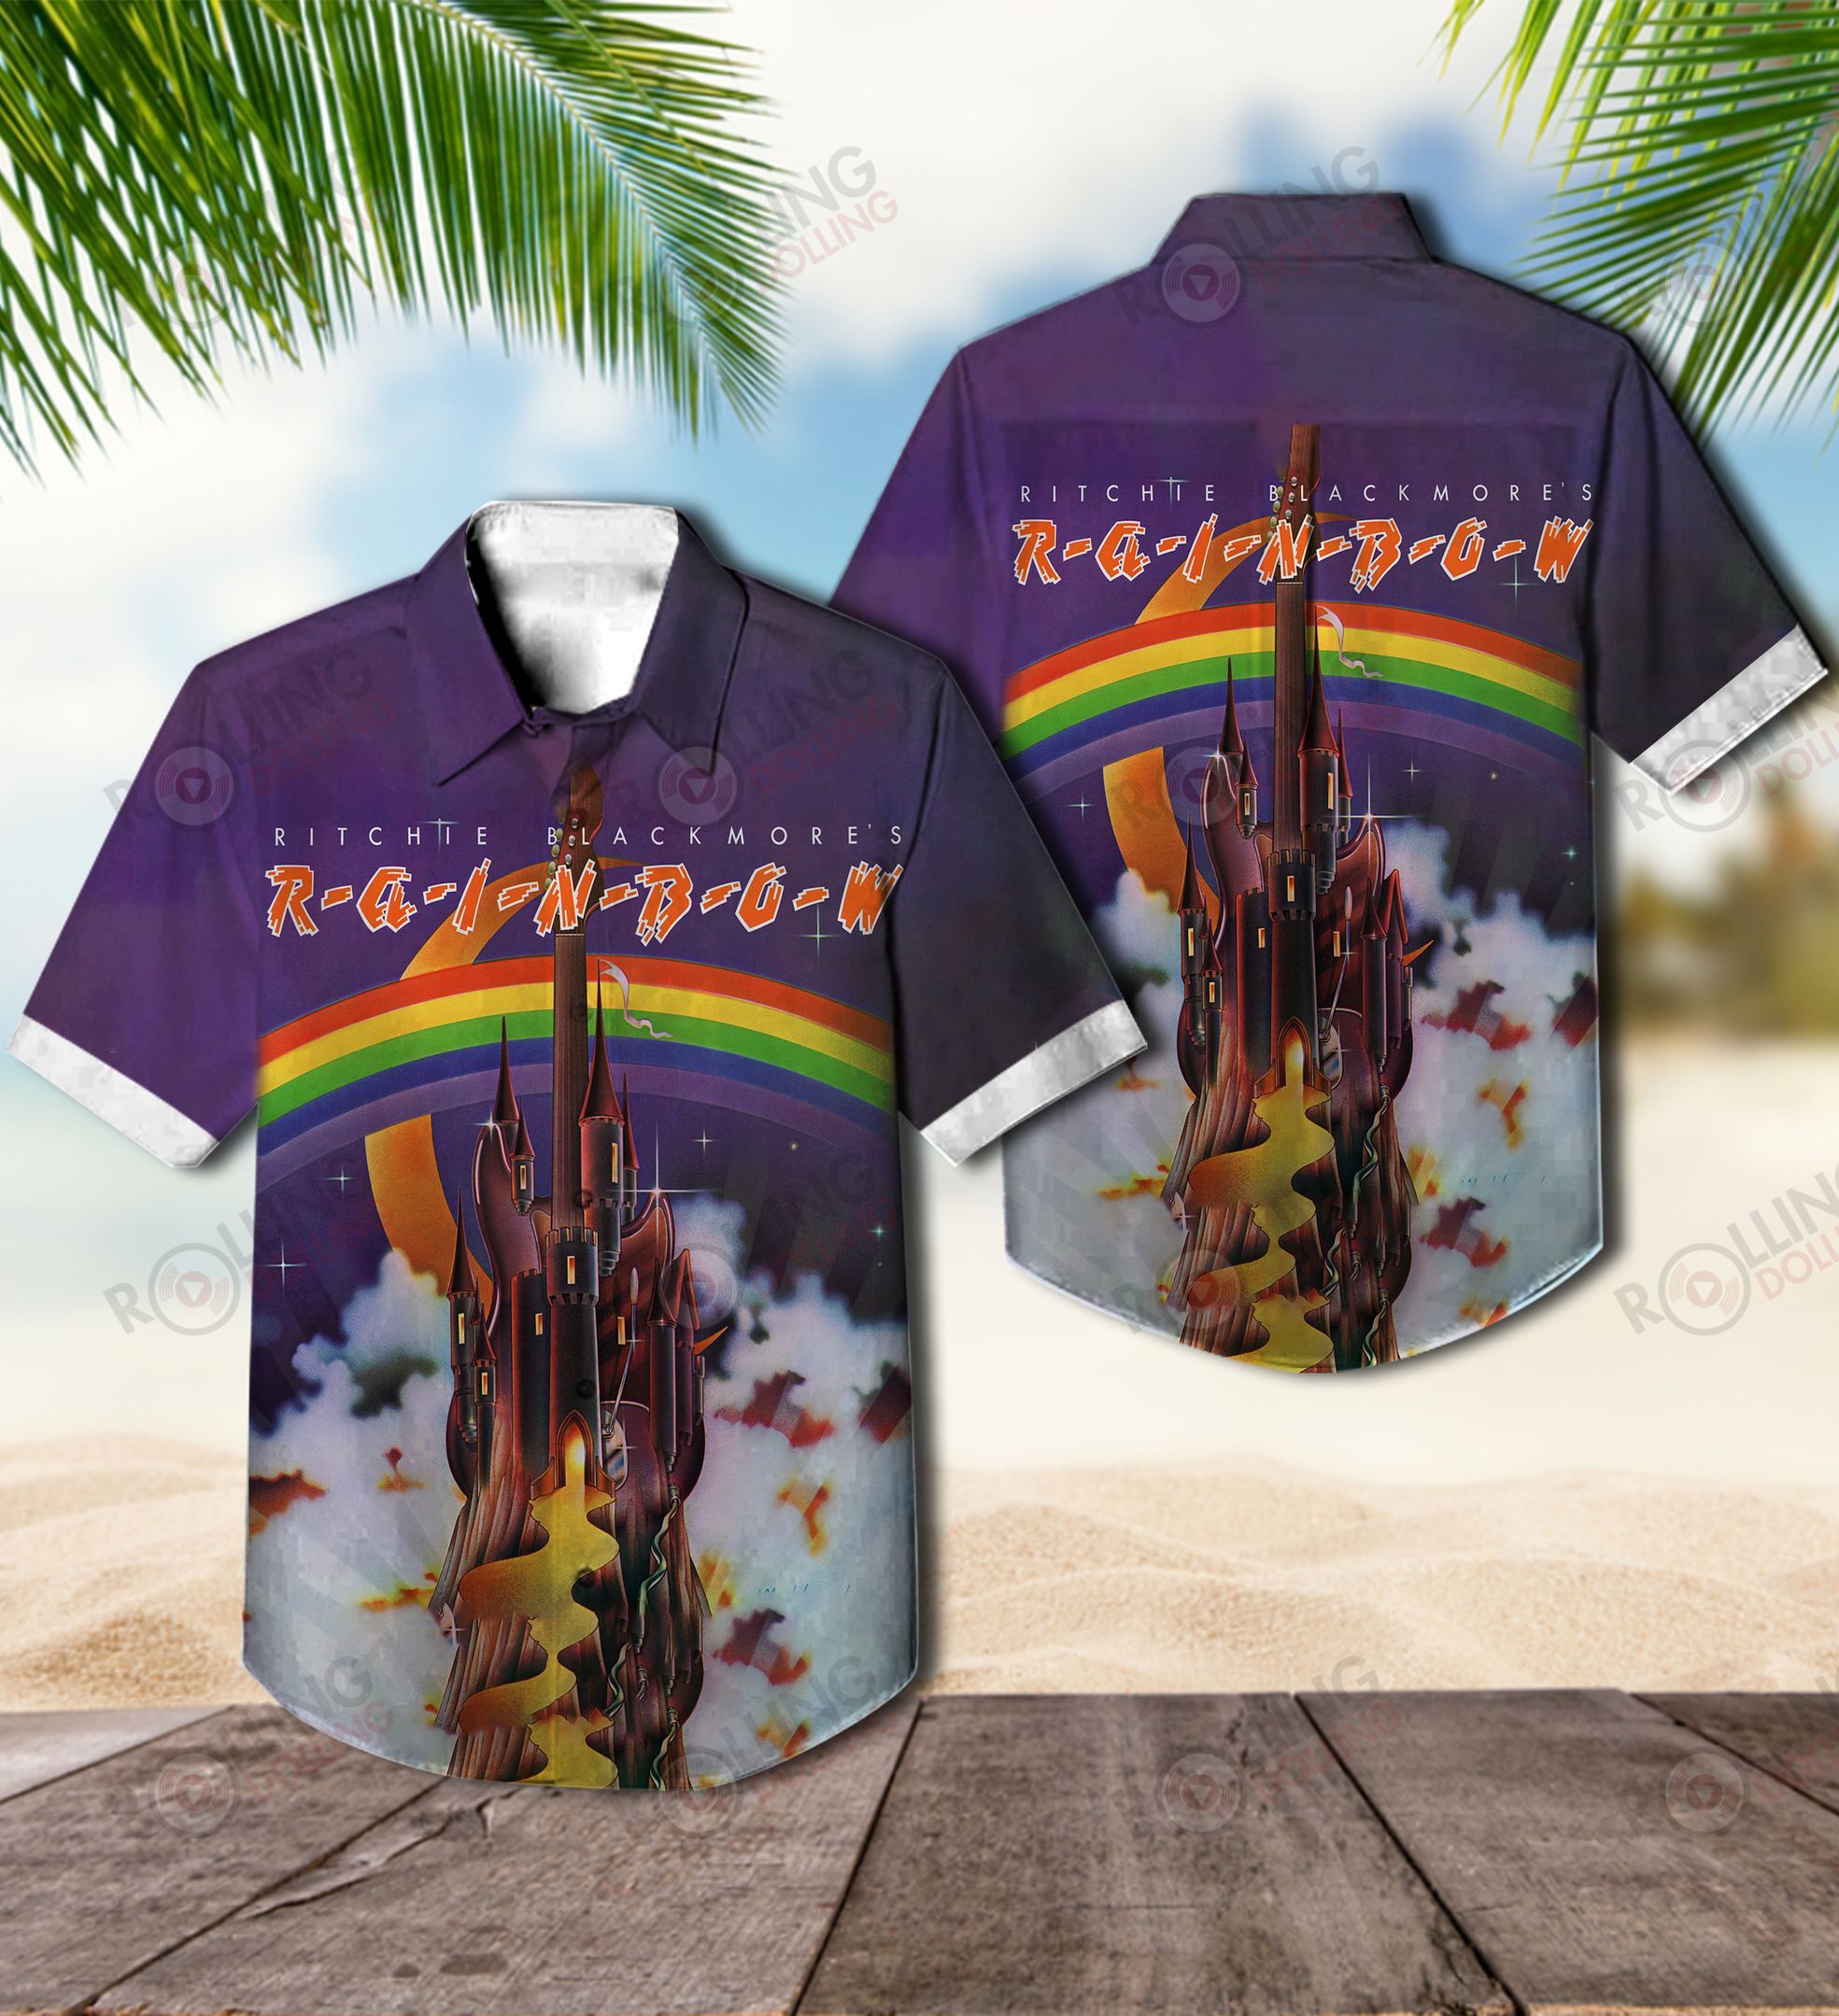 This would make a great gift for any fan who loves Hawaiian Shirt as well as Rock band 6